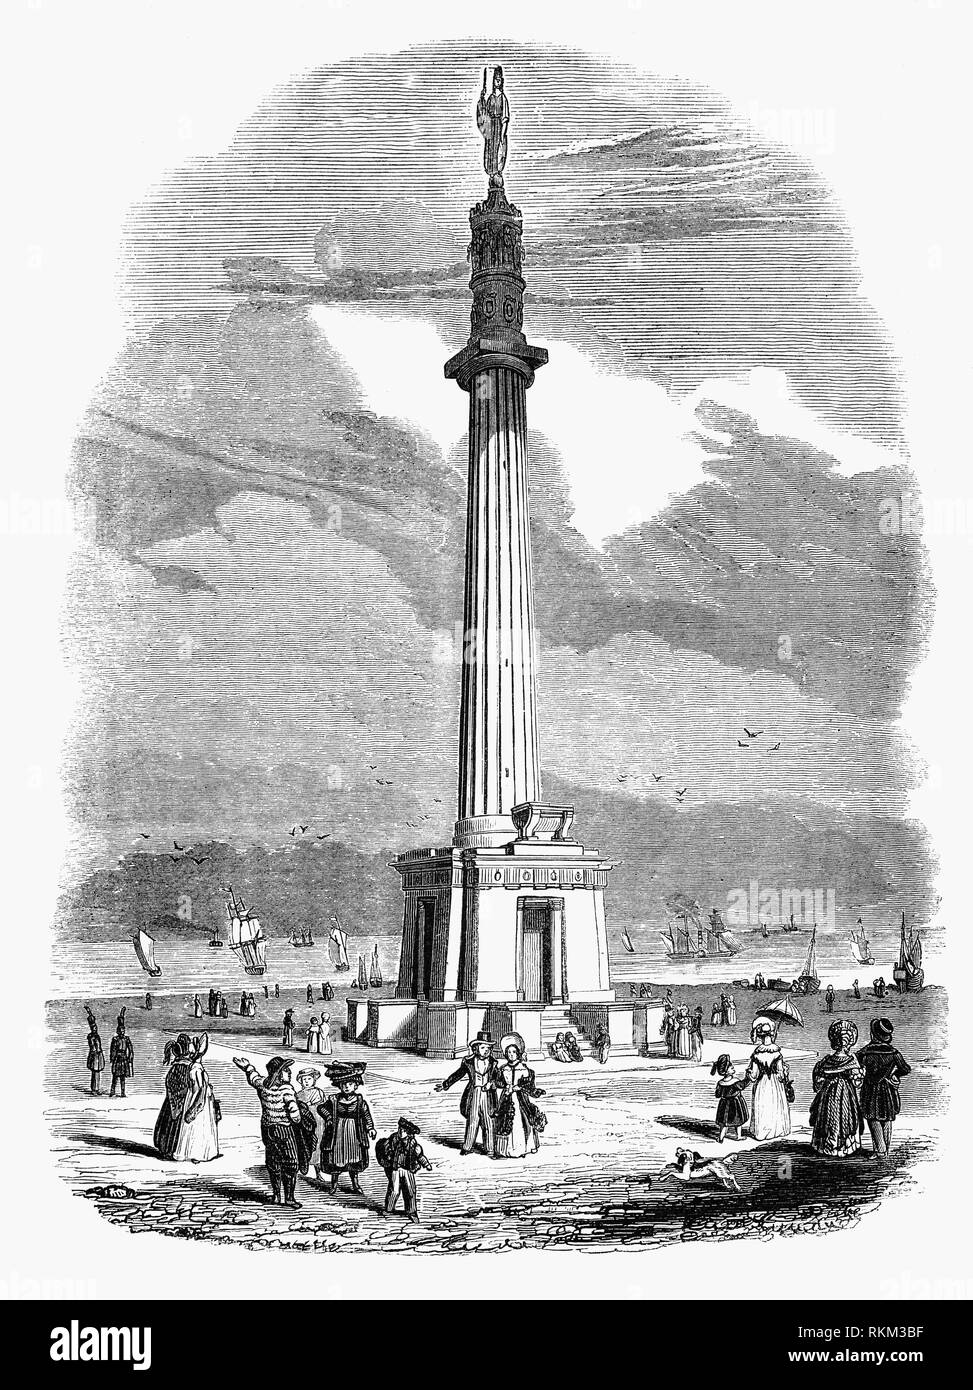 The Nelson's Monument, correctly called the Norfolk Naval Pillar, is in the style of a Doric column and built in memorial to Admiral Horatio Nelson, situated on the Denes, Great Yarmouth in the county of Norfolk, England. Designed by architect William Wilkins, it was raised in the period 1817–19 from money raised by a committee of local magnates. The first custodian of the monument was former Able Seaman James Sharman, a member of the crew of HMS Victory from Norfolk and one of those who carried Nelson below decks after he was shot. Stock Photo